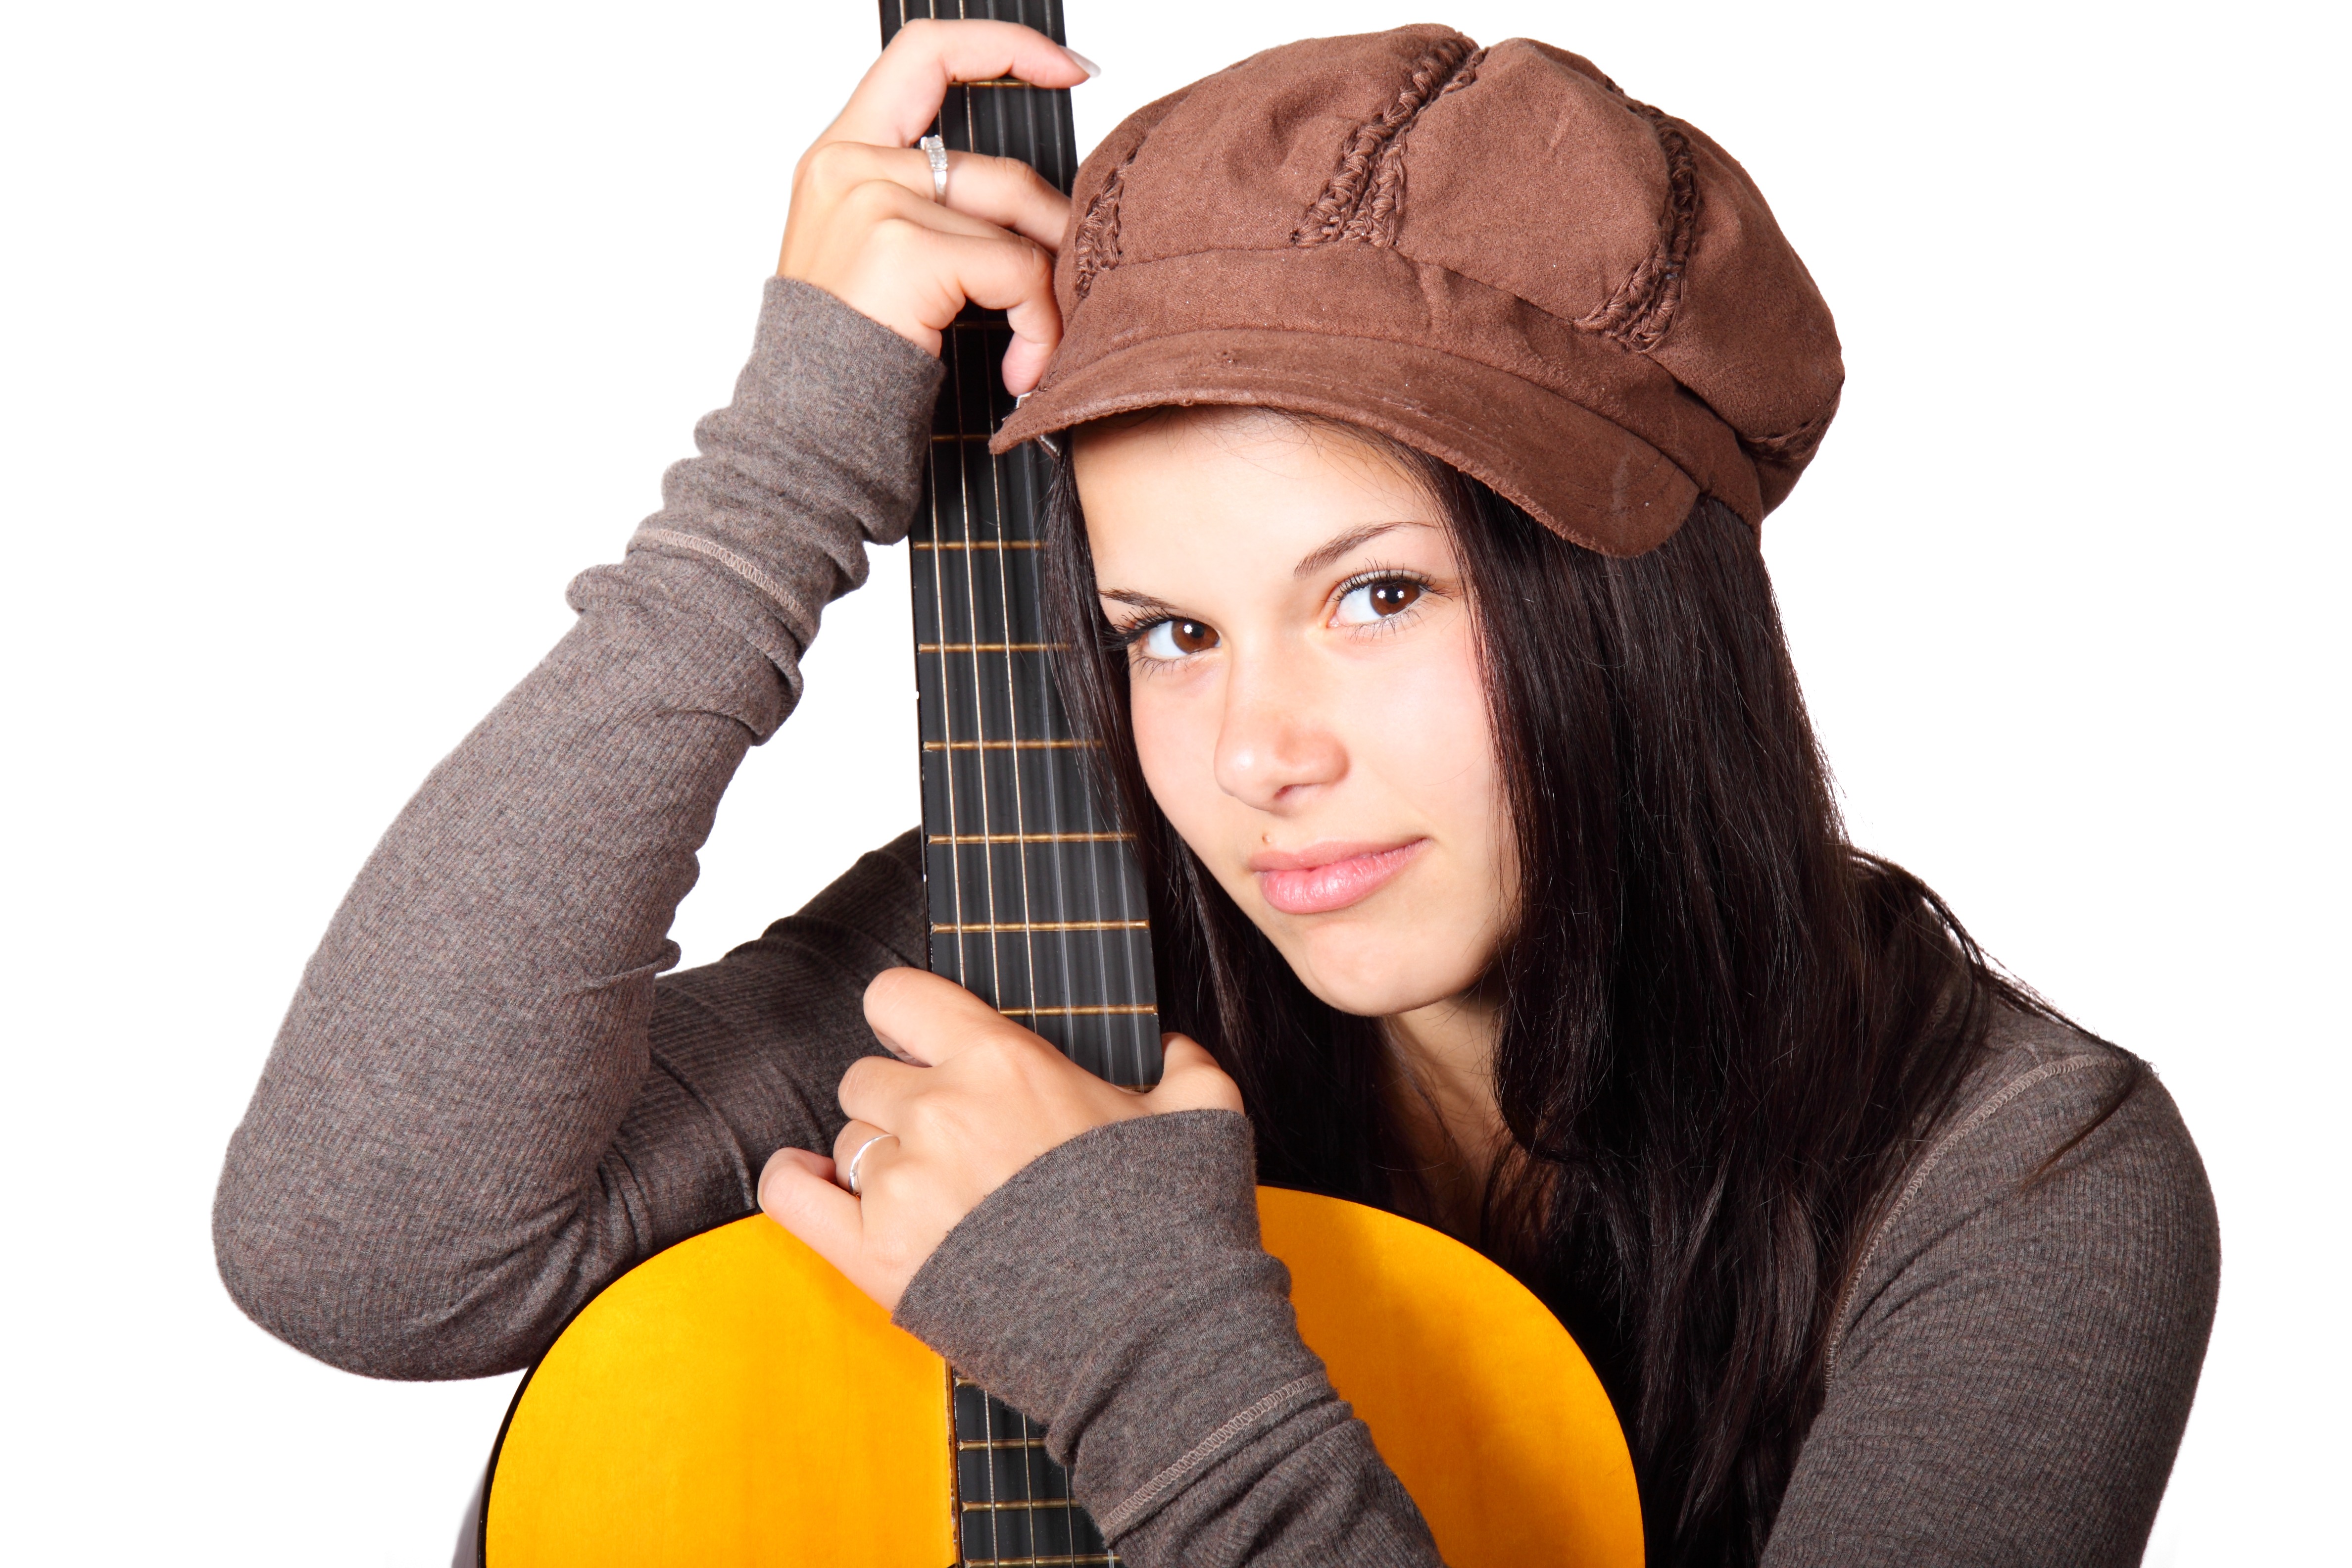 Girl with guitar photo